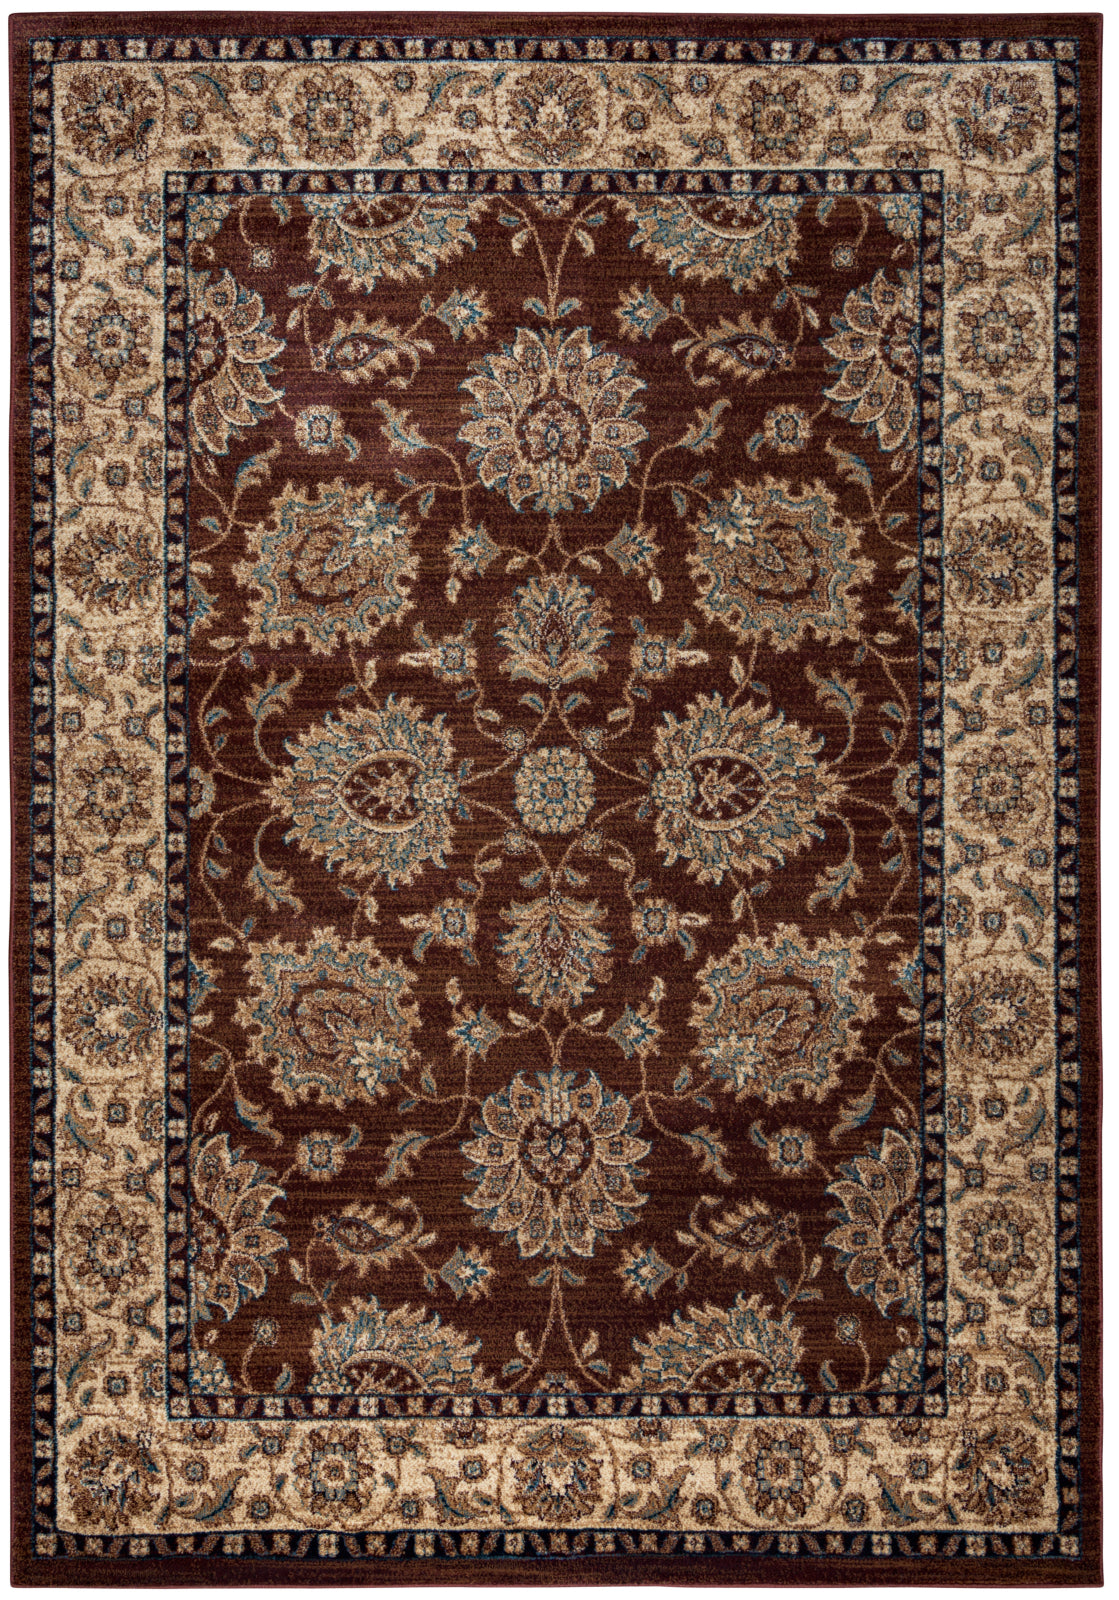 Rizzy Bellevue BV3978 Area Rug main image